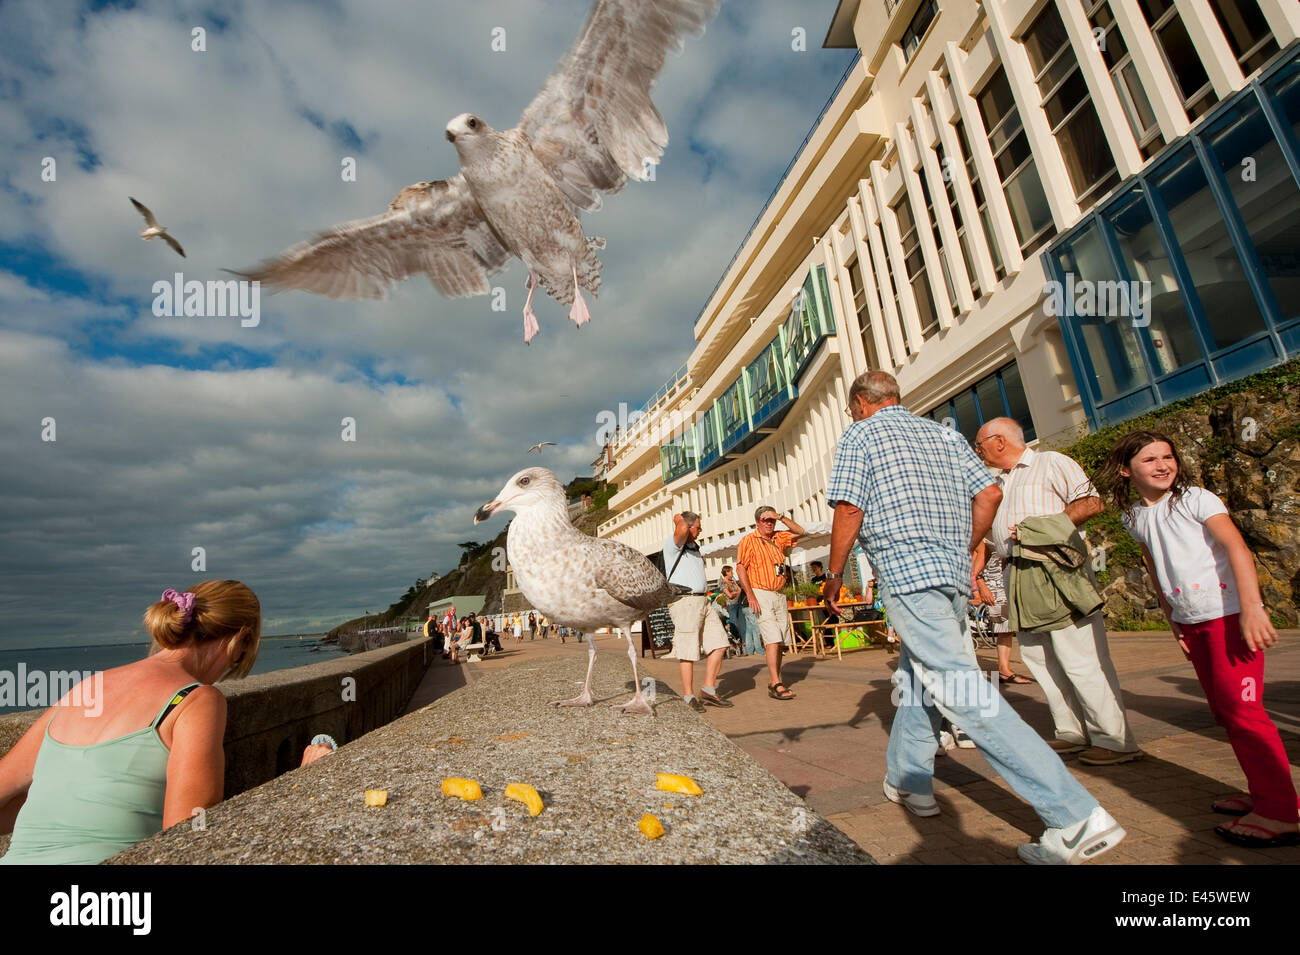 Herring gull (Larus argentatus) swooping down to feed on chips in a busy seaside resort, France Stock Photo